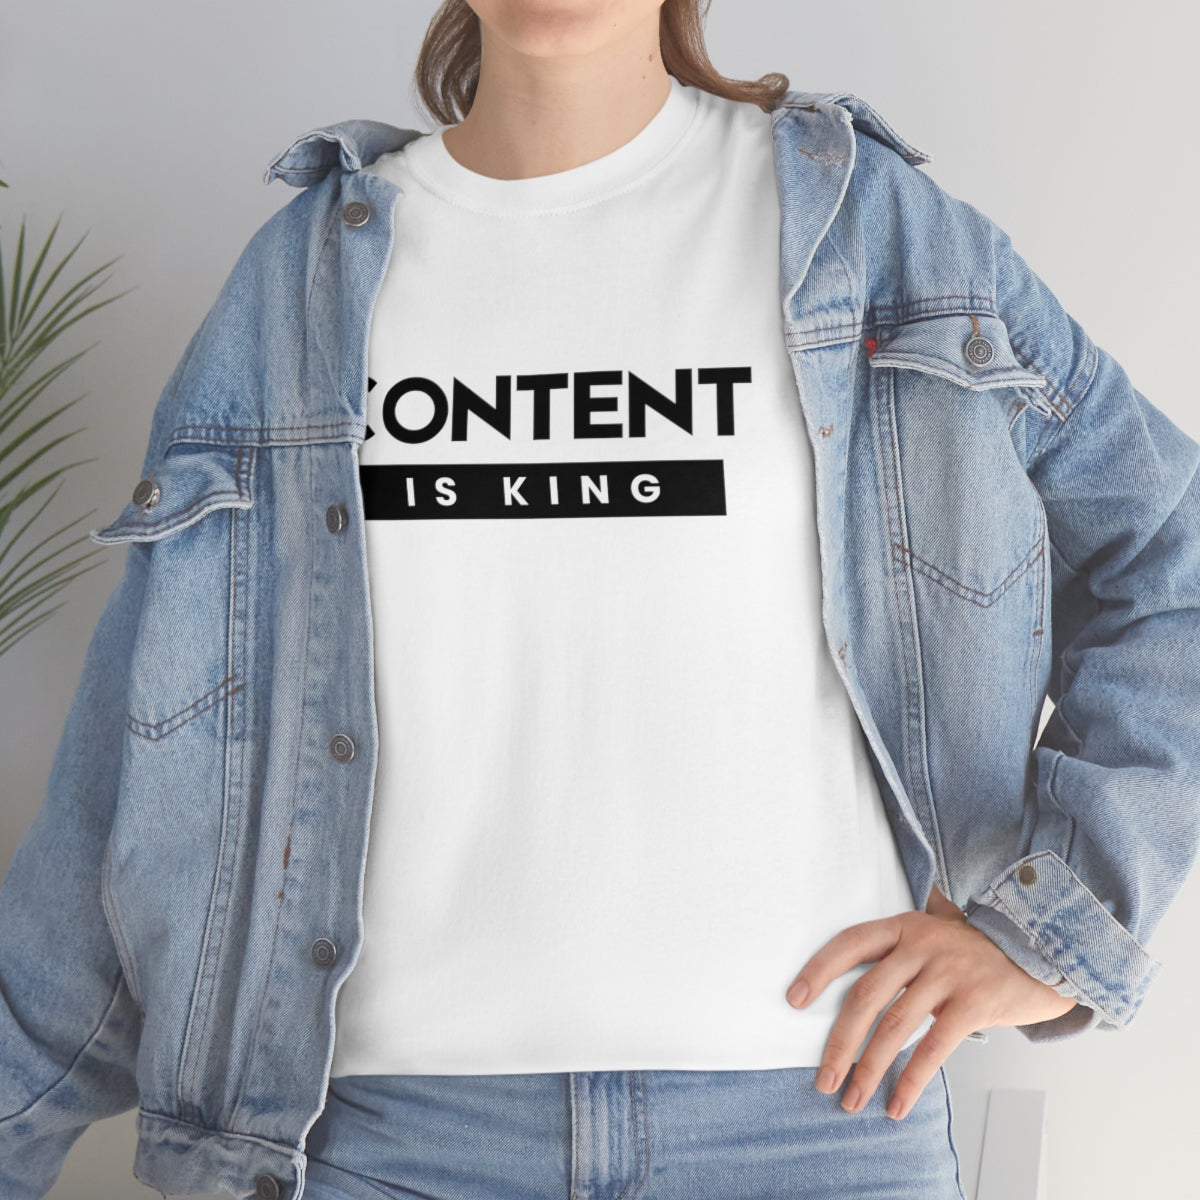 Heavy Cotton Tee - Content is King